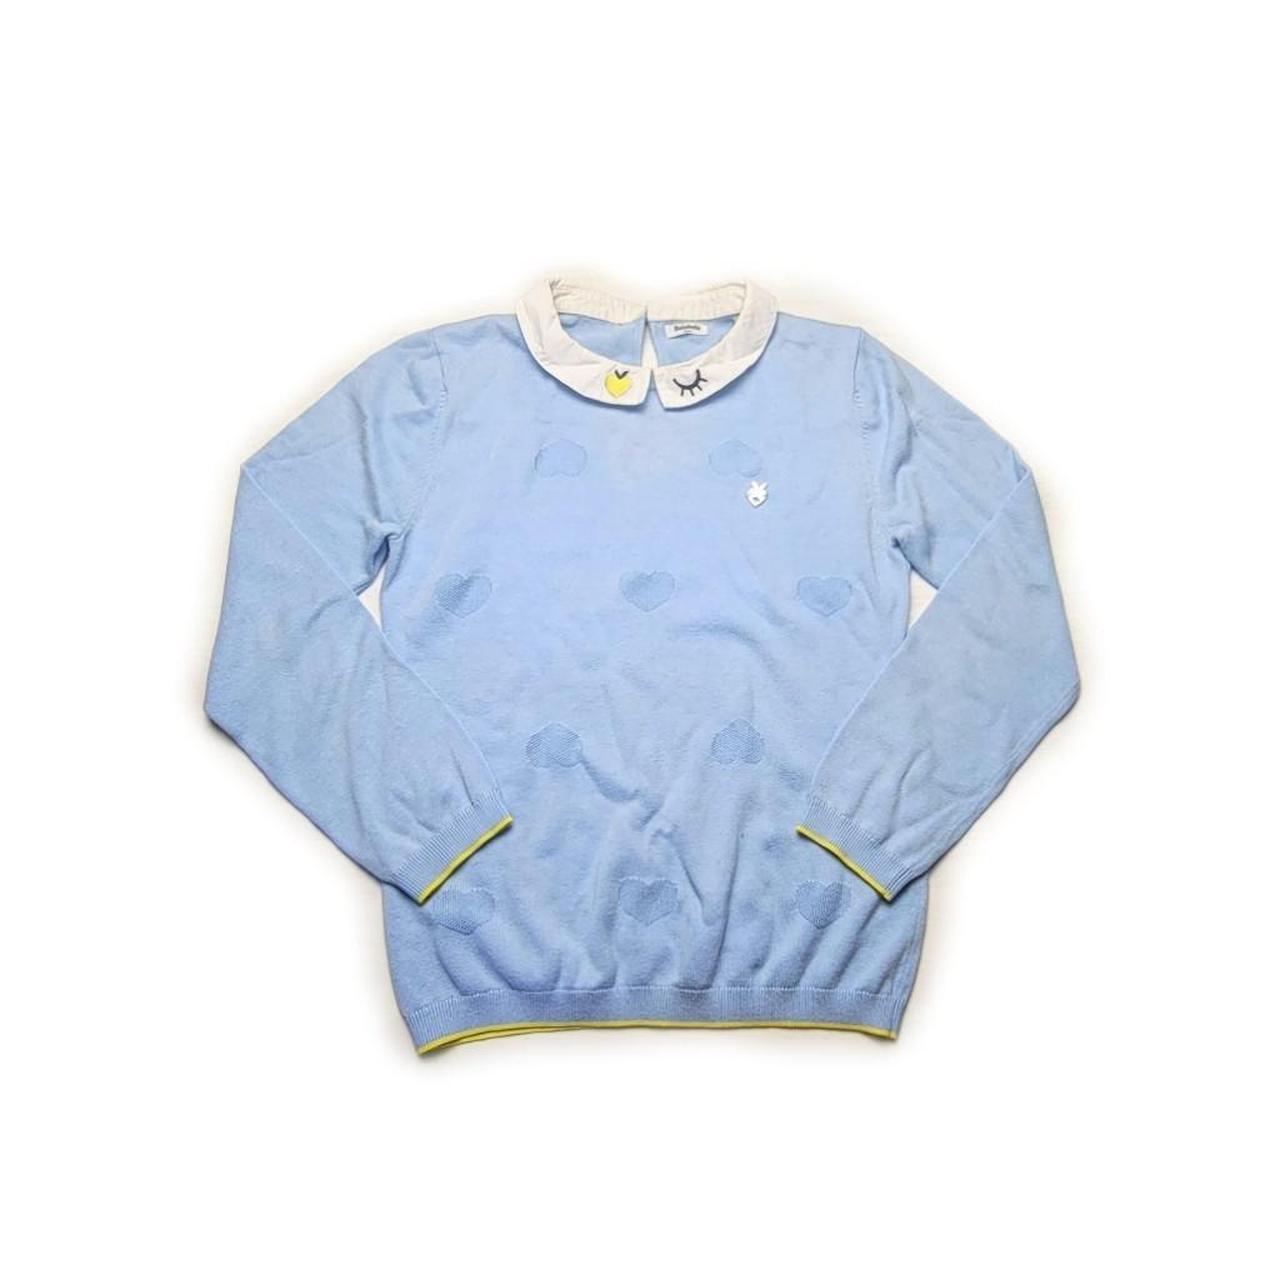 Product Image 1 - Blue Sweater Blouse

Absolutely adorable. A